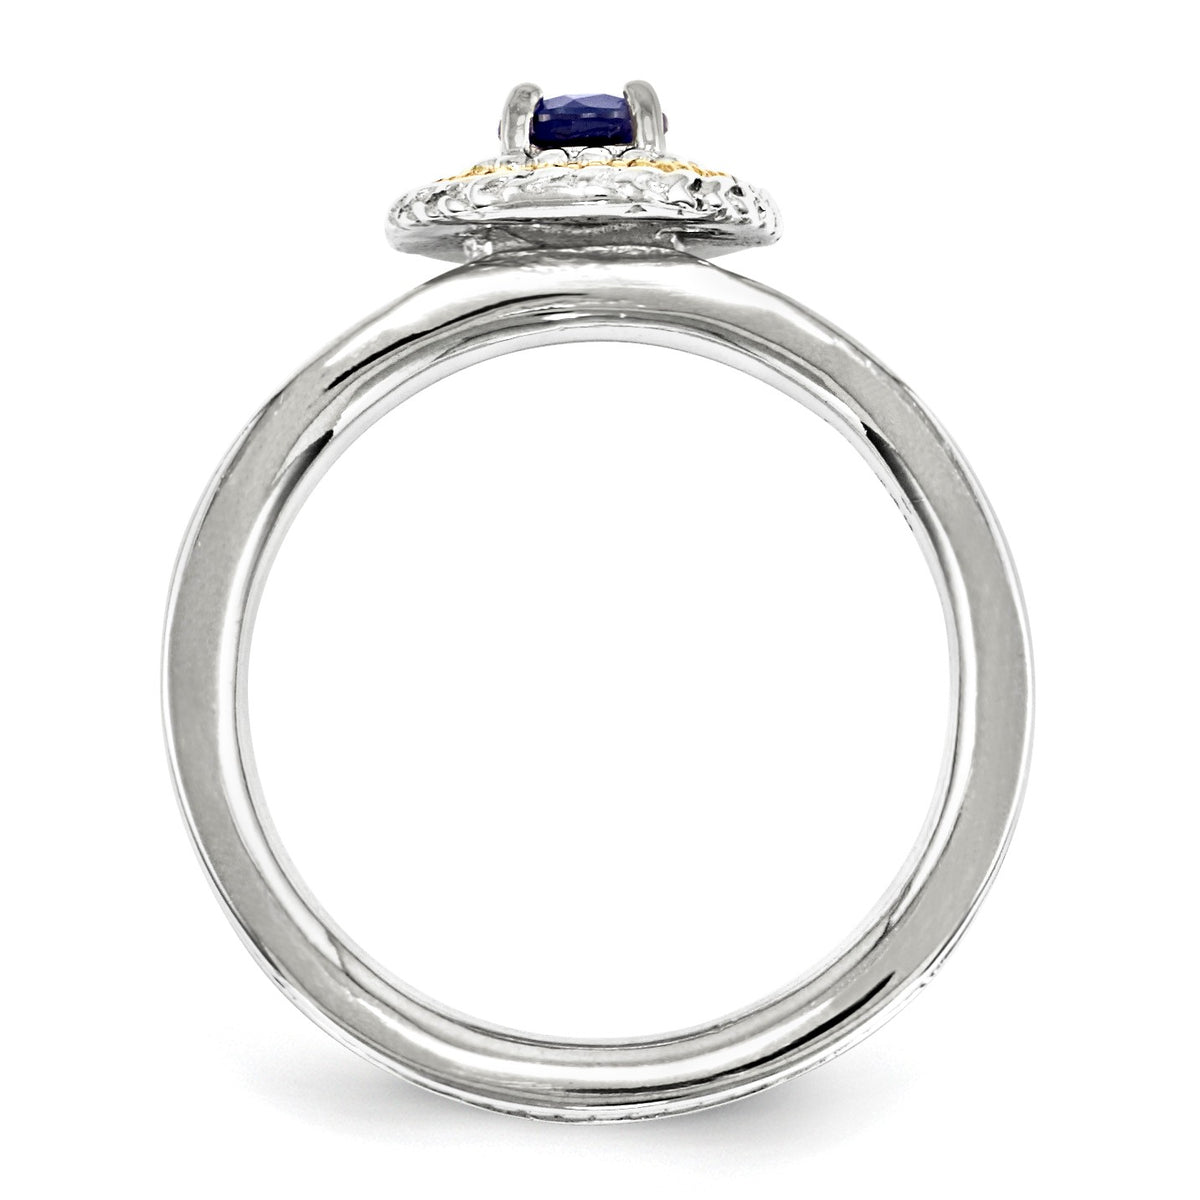 Alternate view of the Sterling Silver &amp; 14K Gold Plated Stackable Created Sapphire Ring by The Black Bow Jewelry Co.